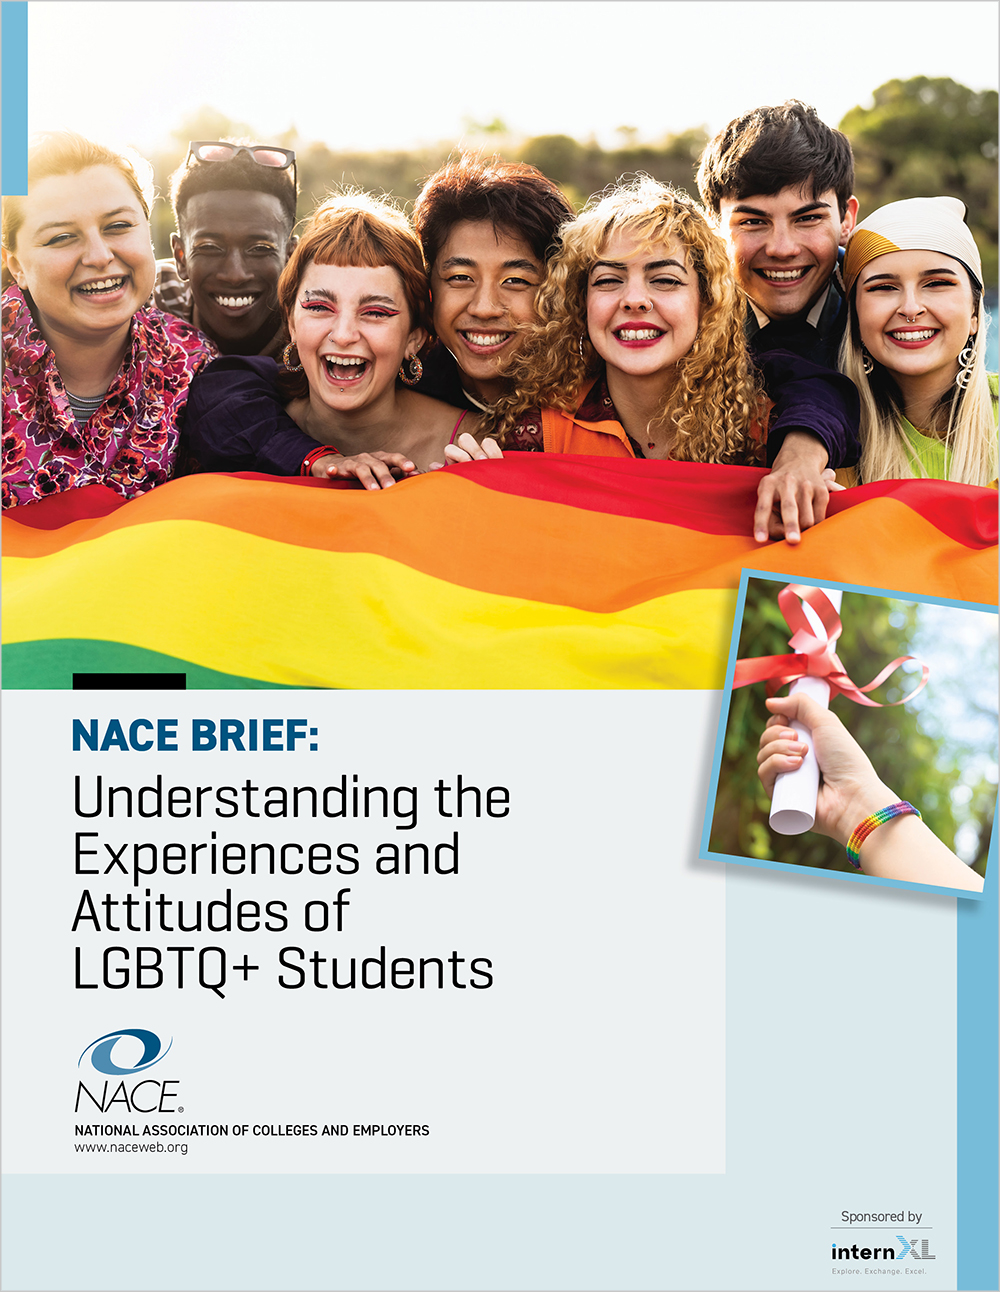 NACE Brief: Understanding the Experiences and Attitudes of LGBTQ+ Students